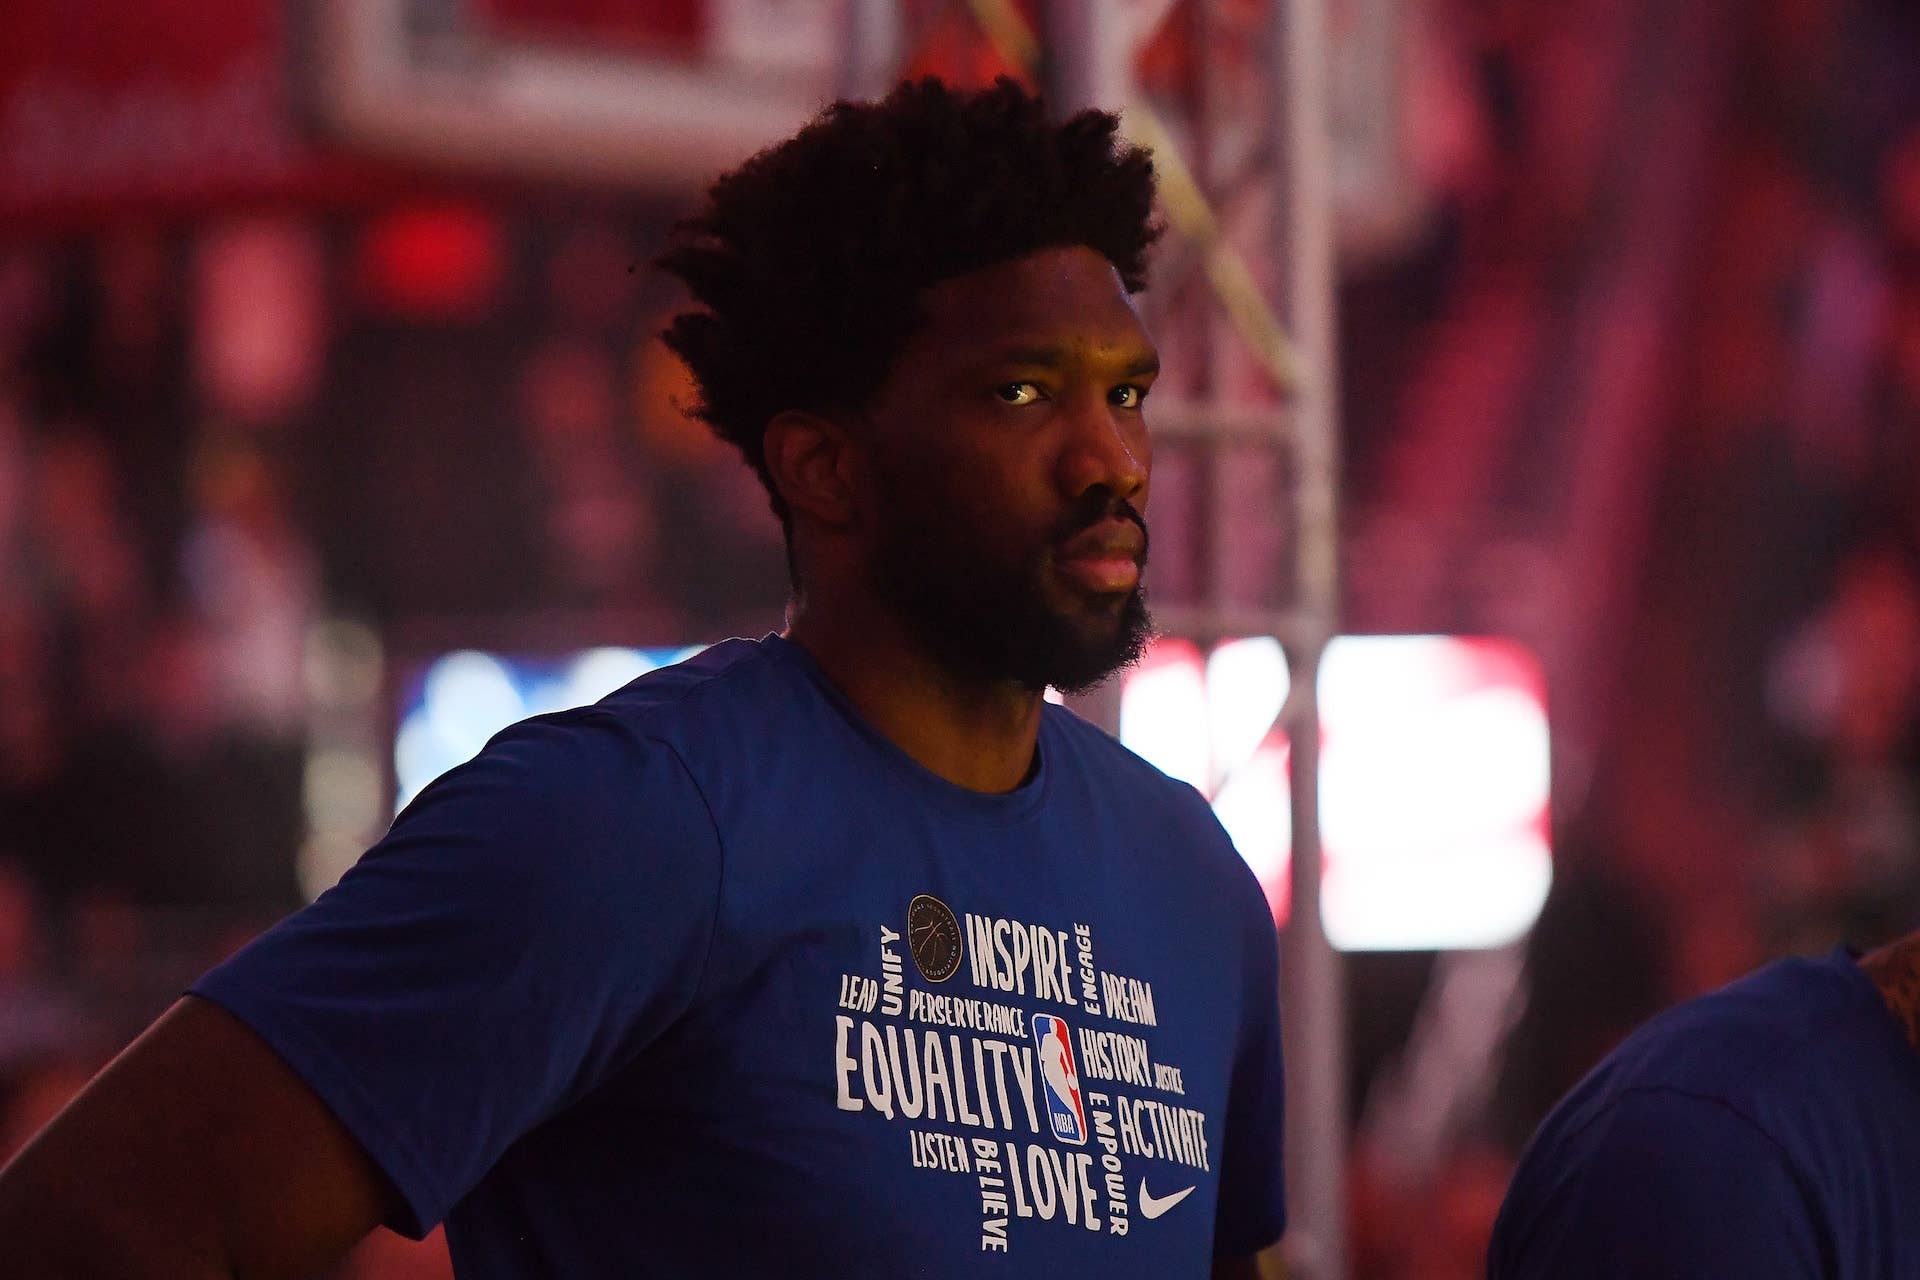 Joel Embiid #21 of the Philadelphia 76ers stands for the National Anthem prior to a game.